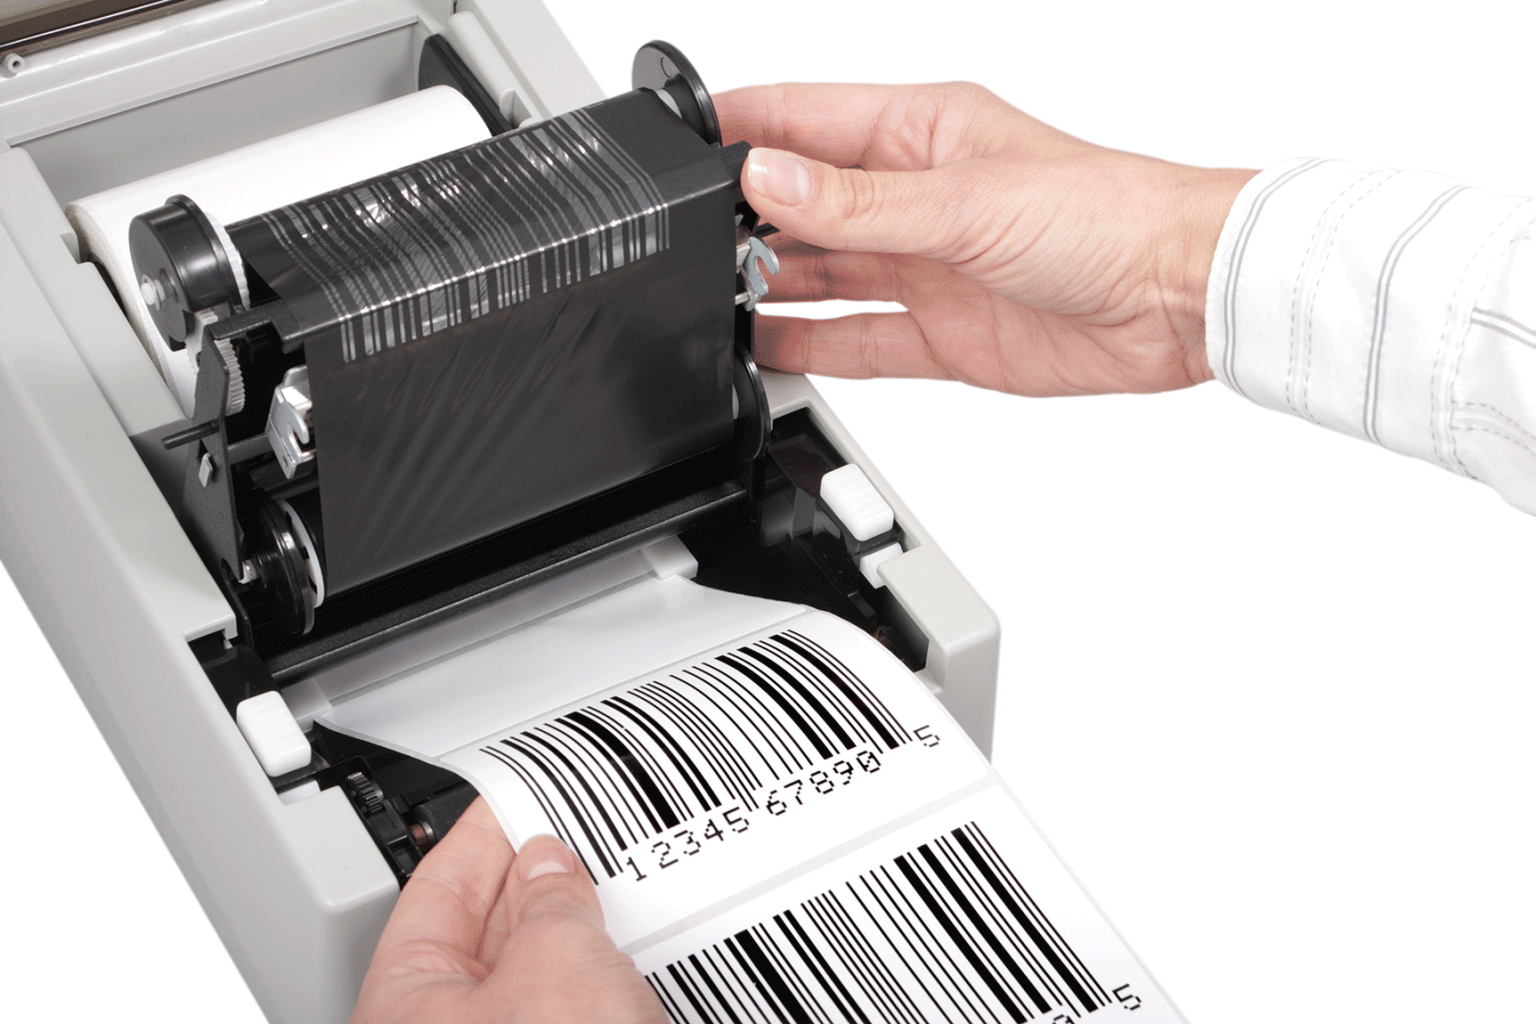 The global thermal printing market is estimated to be valued at US$45.60 billion in 2022 and is expected to exhibit a CAGR of 4.5% over the forecast period 2023-2030